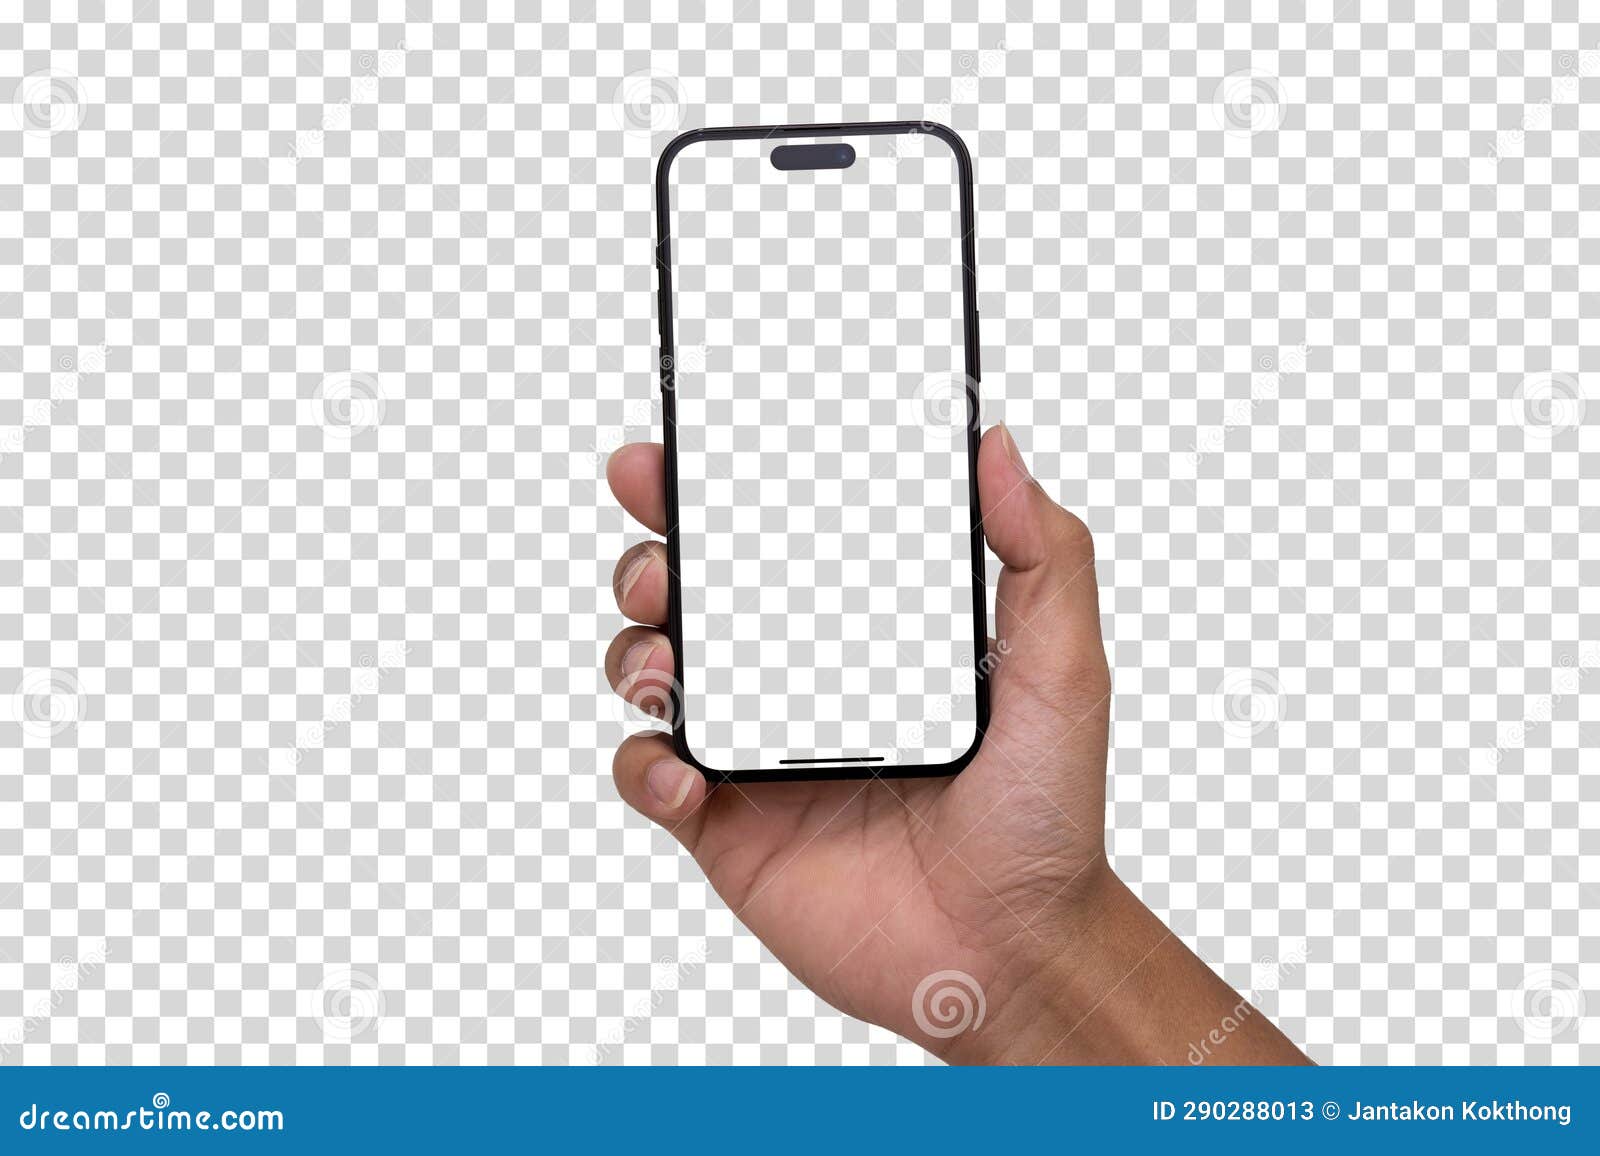 smart phone mockup and screen transparent and clipping path 